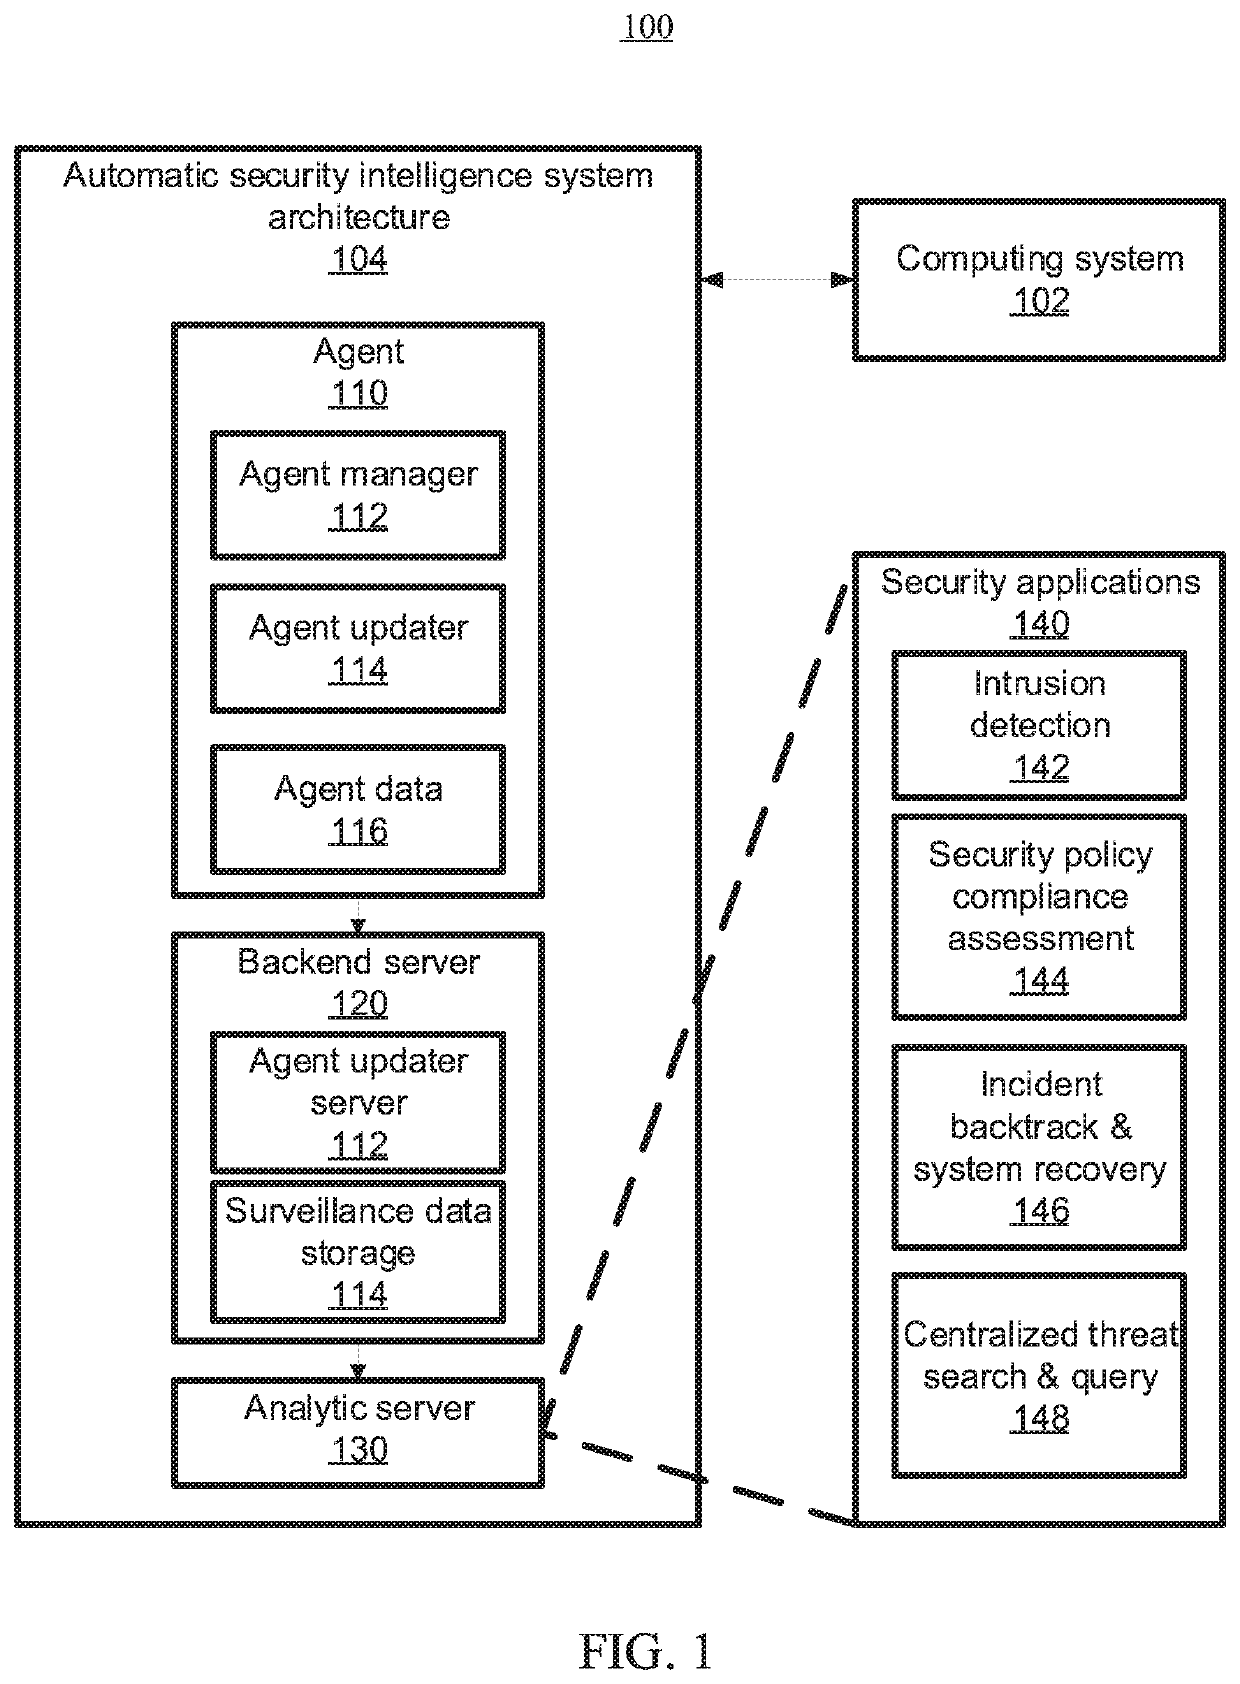 Unknown malicious program behavior detection using a graph neural network